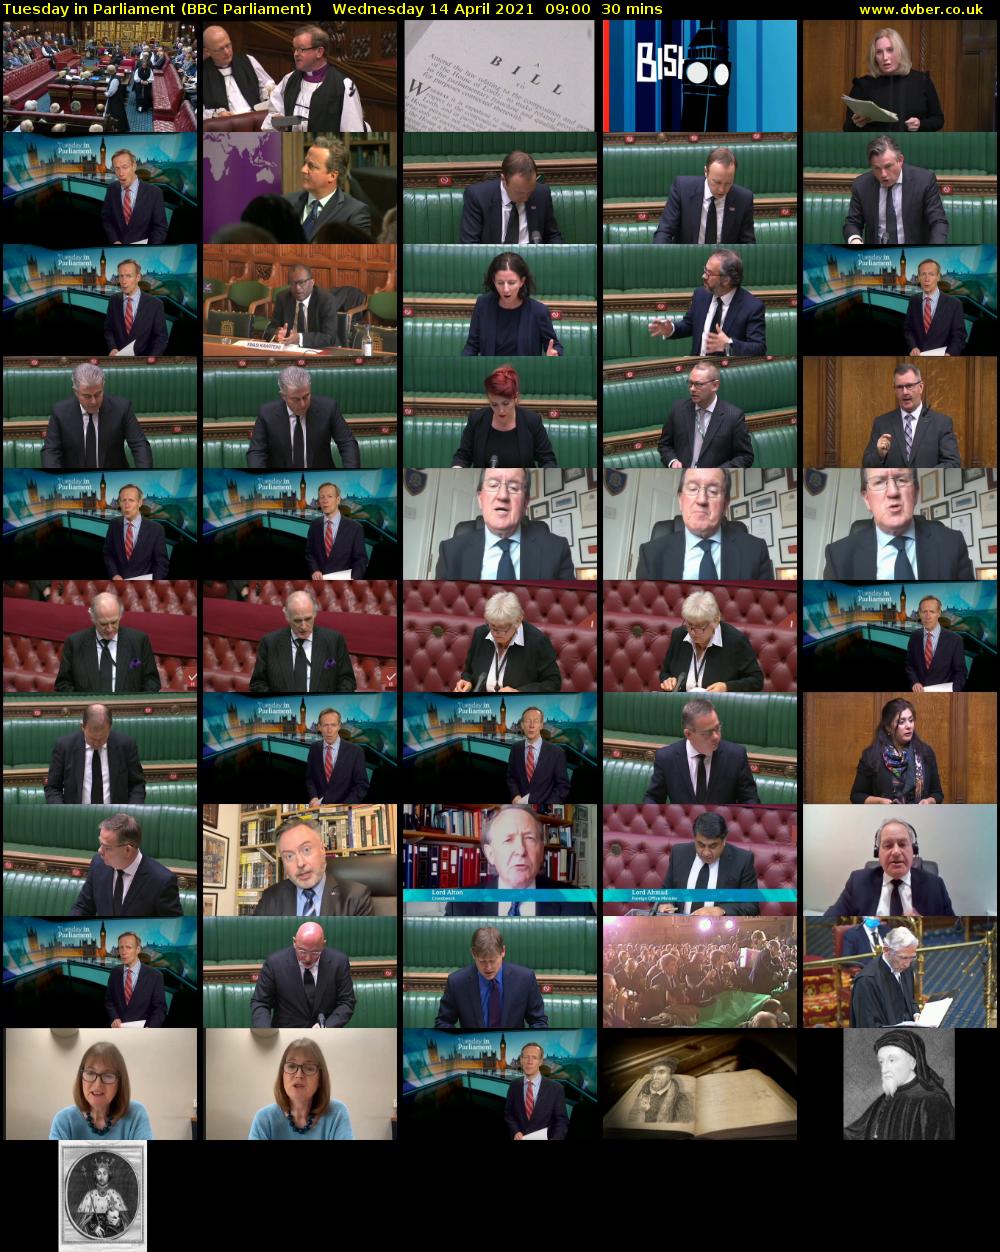 Tuesday in Parliament (BBC Parliament) Wednesday 14 April 2021 09:00 - 09:30